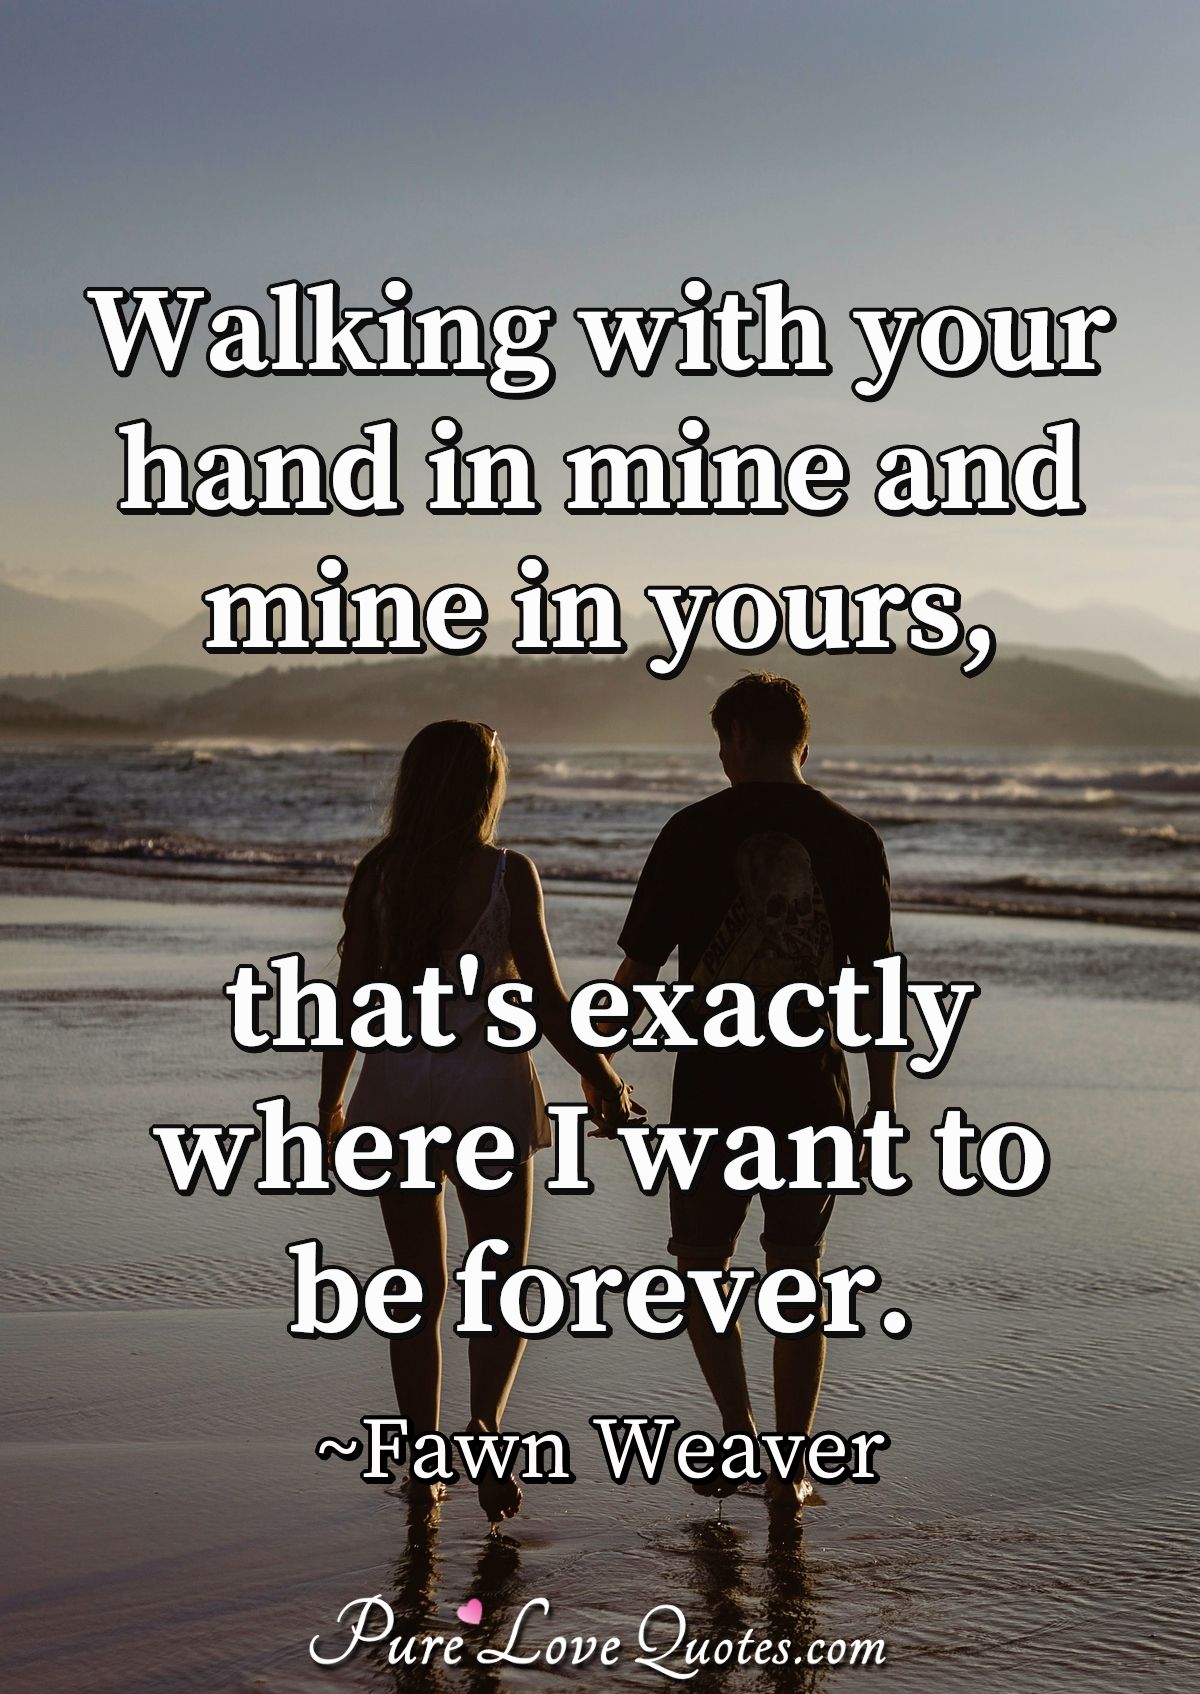 Walking with your hand in mine and mine in yours, that's exactly where I want to be forever. - Fawn Weaver